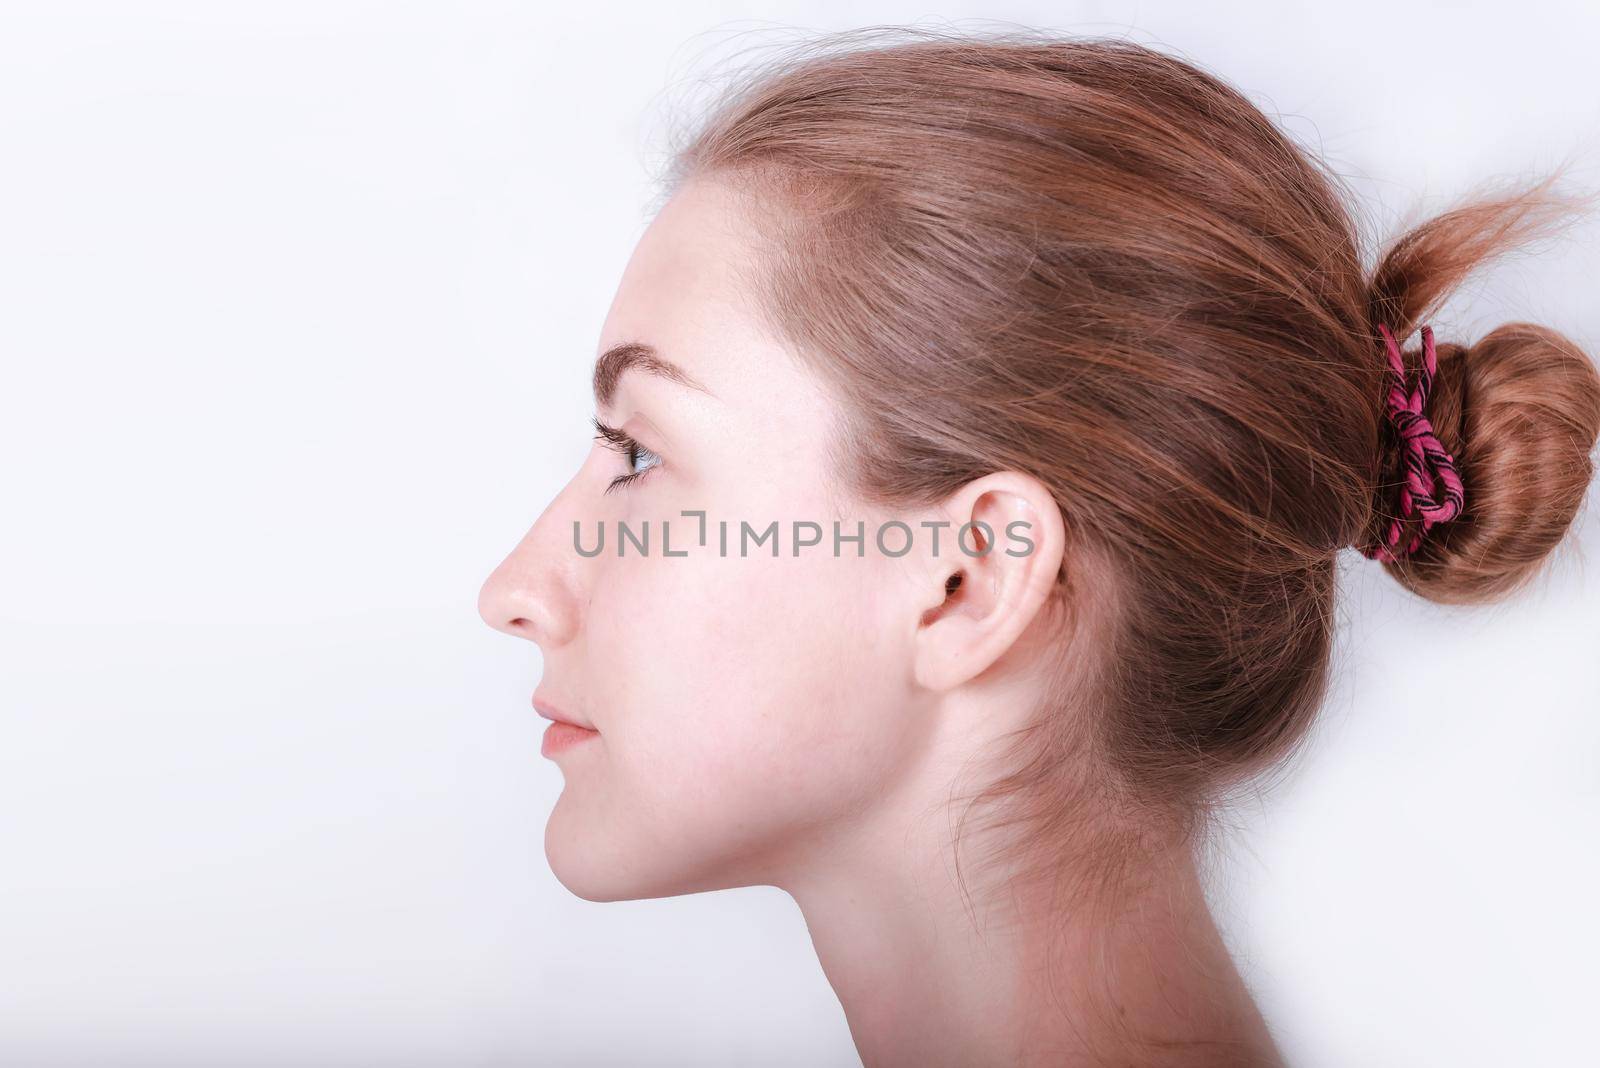 Facial Skin Care and Beauty Face Treatment, Closeup Portrait Headshot of Pretty Woman Face With Makeup Cosmetic on Studio Isolated White Background. Body Cosmetology Surgery and Skincare Treatment